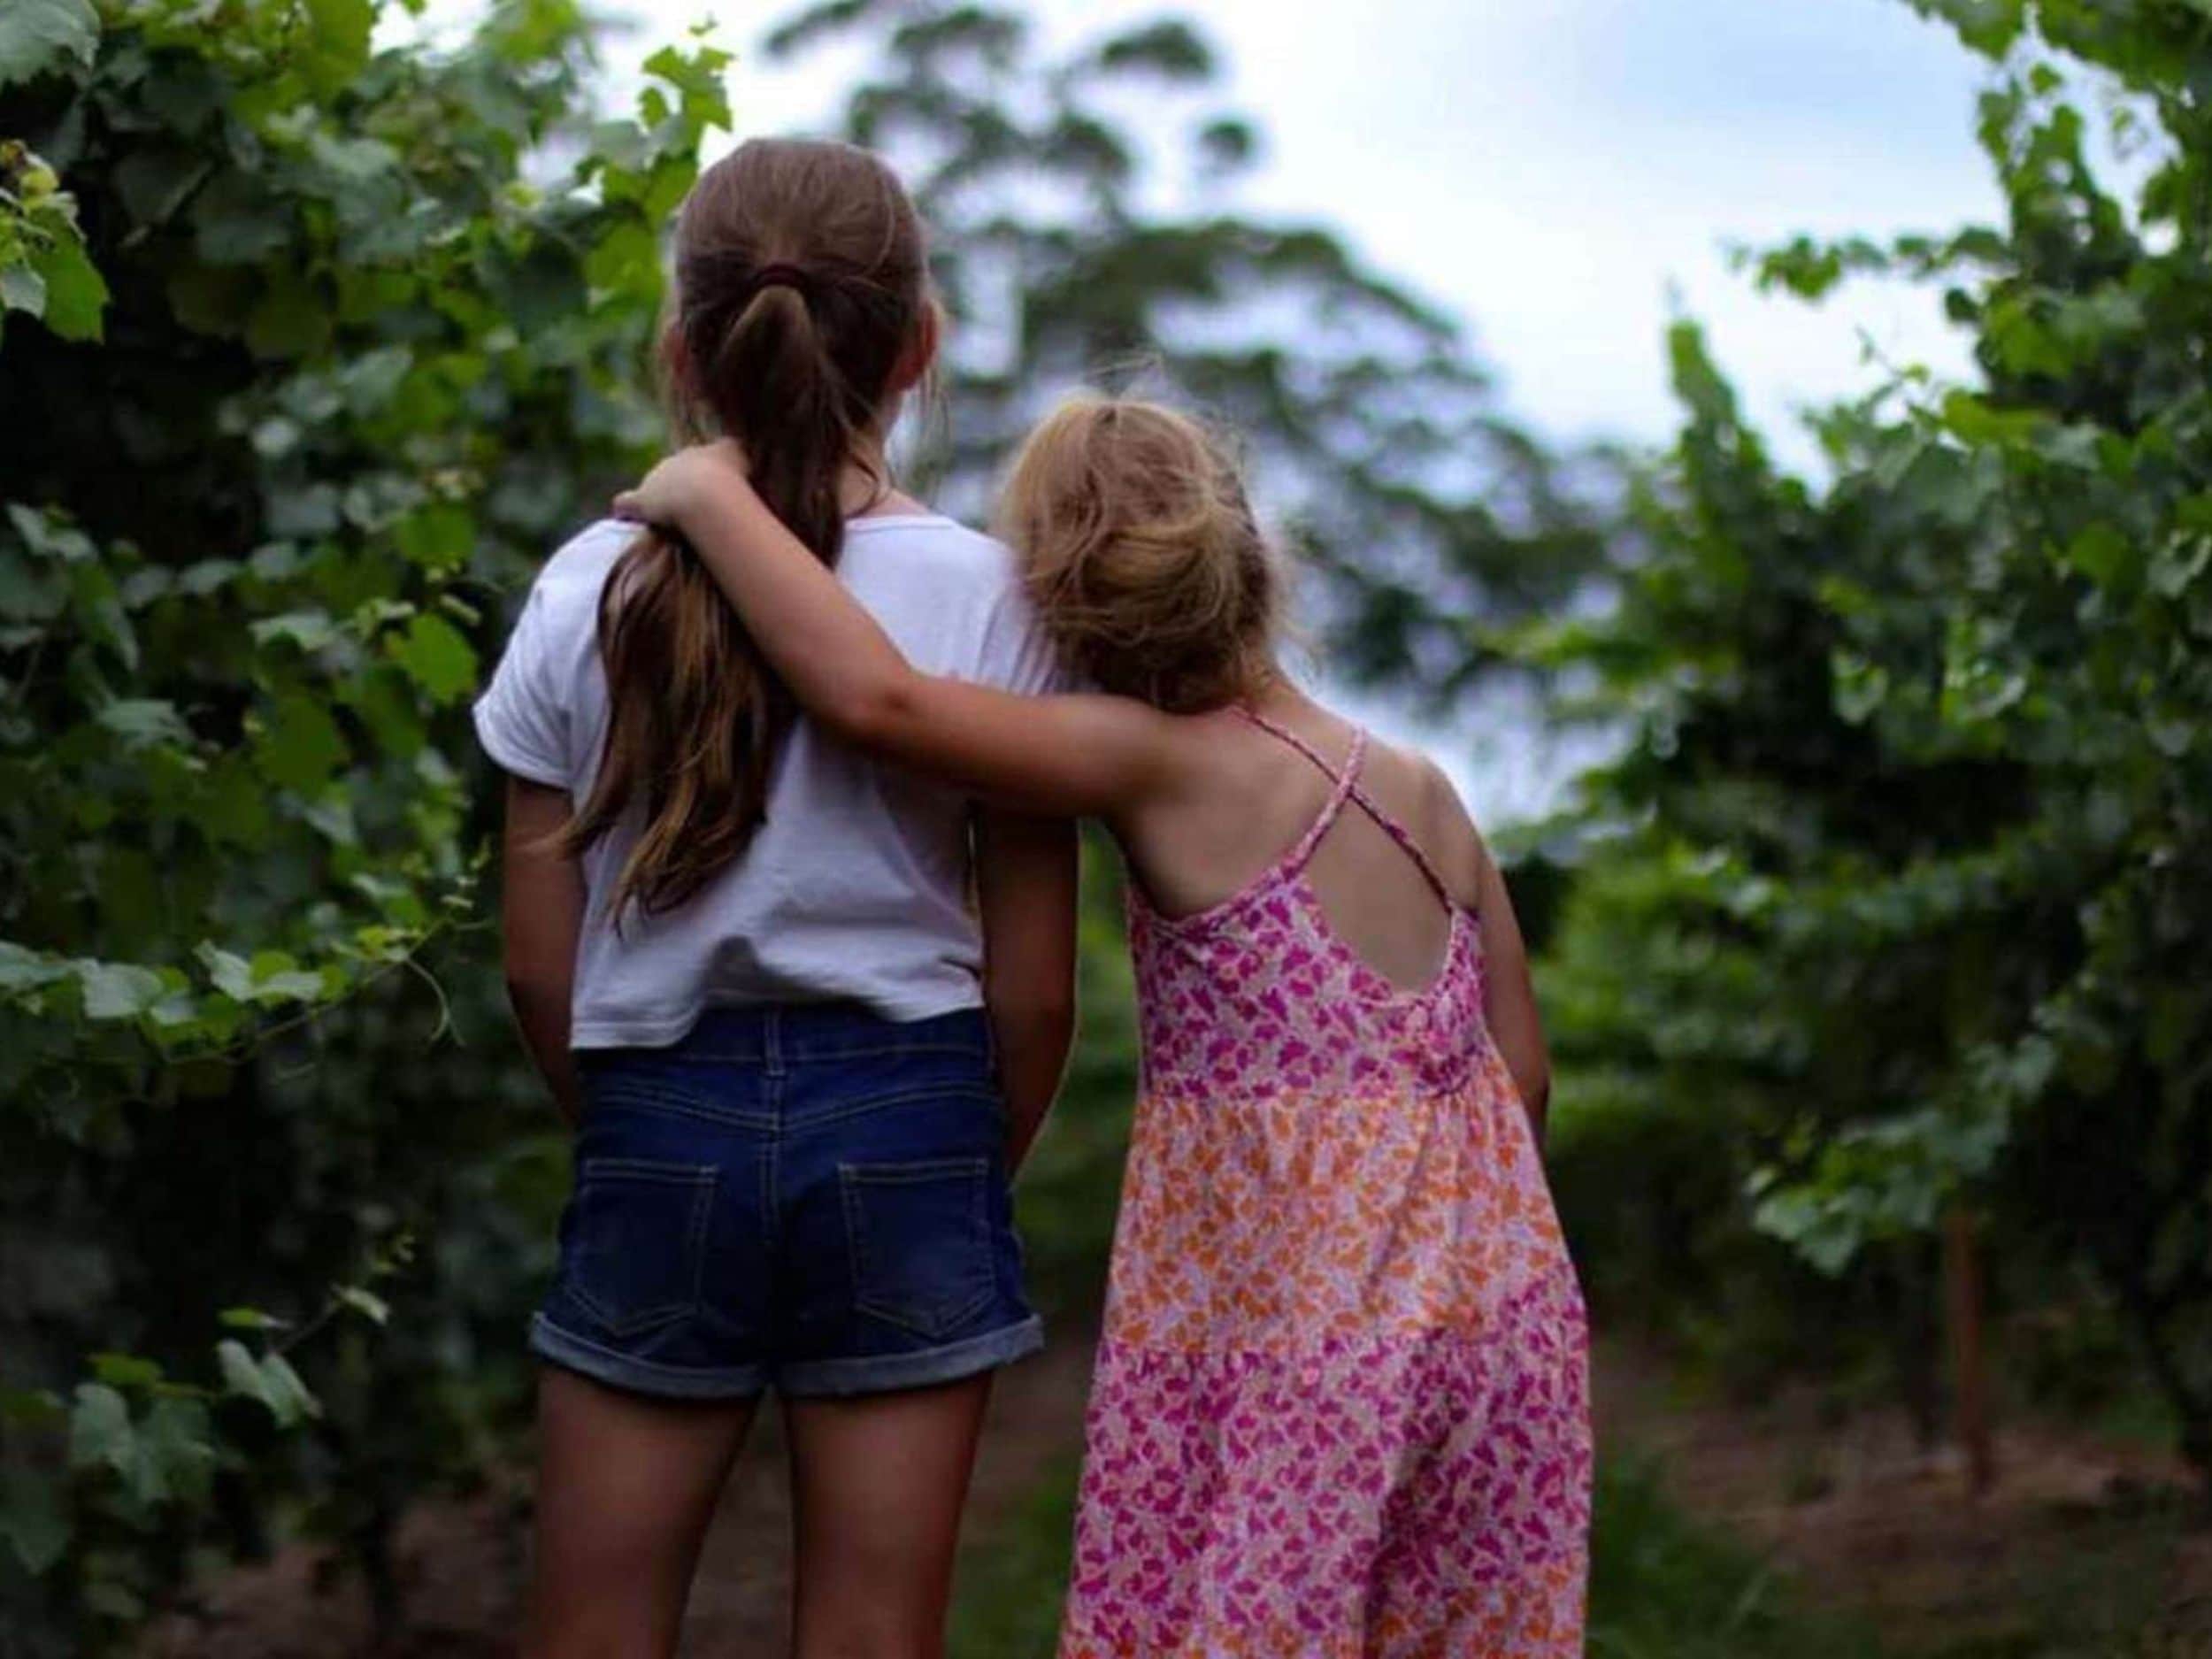 Girls in summer clothing looking away from the camera, surrounded by bushes